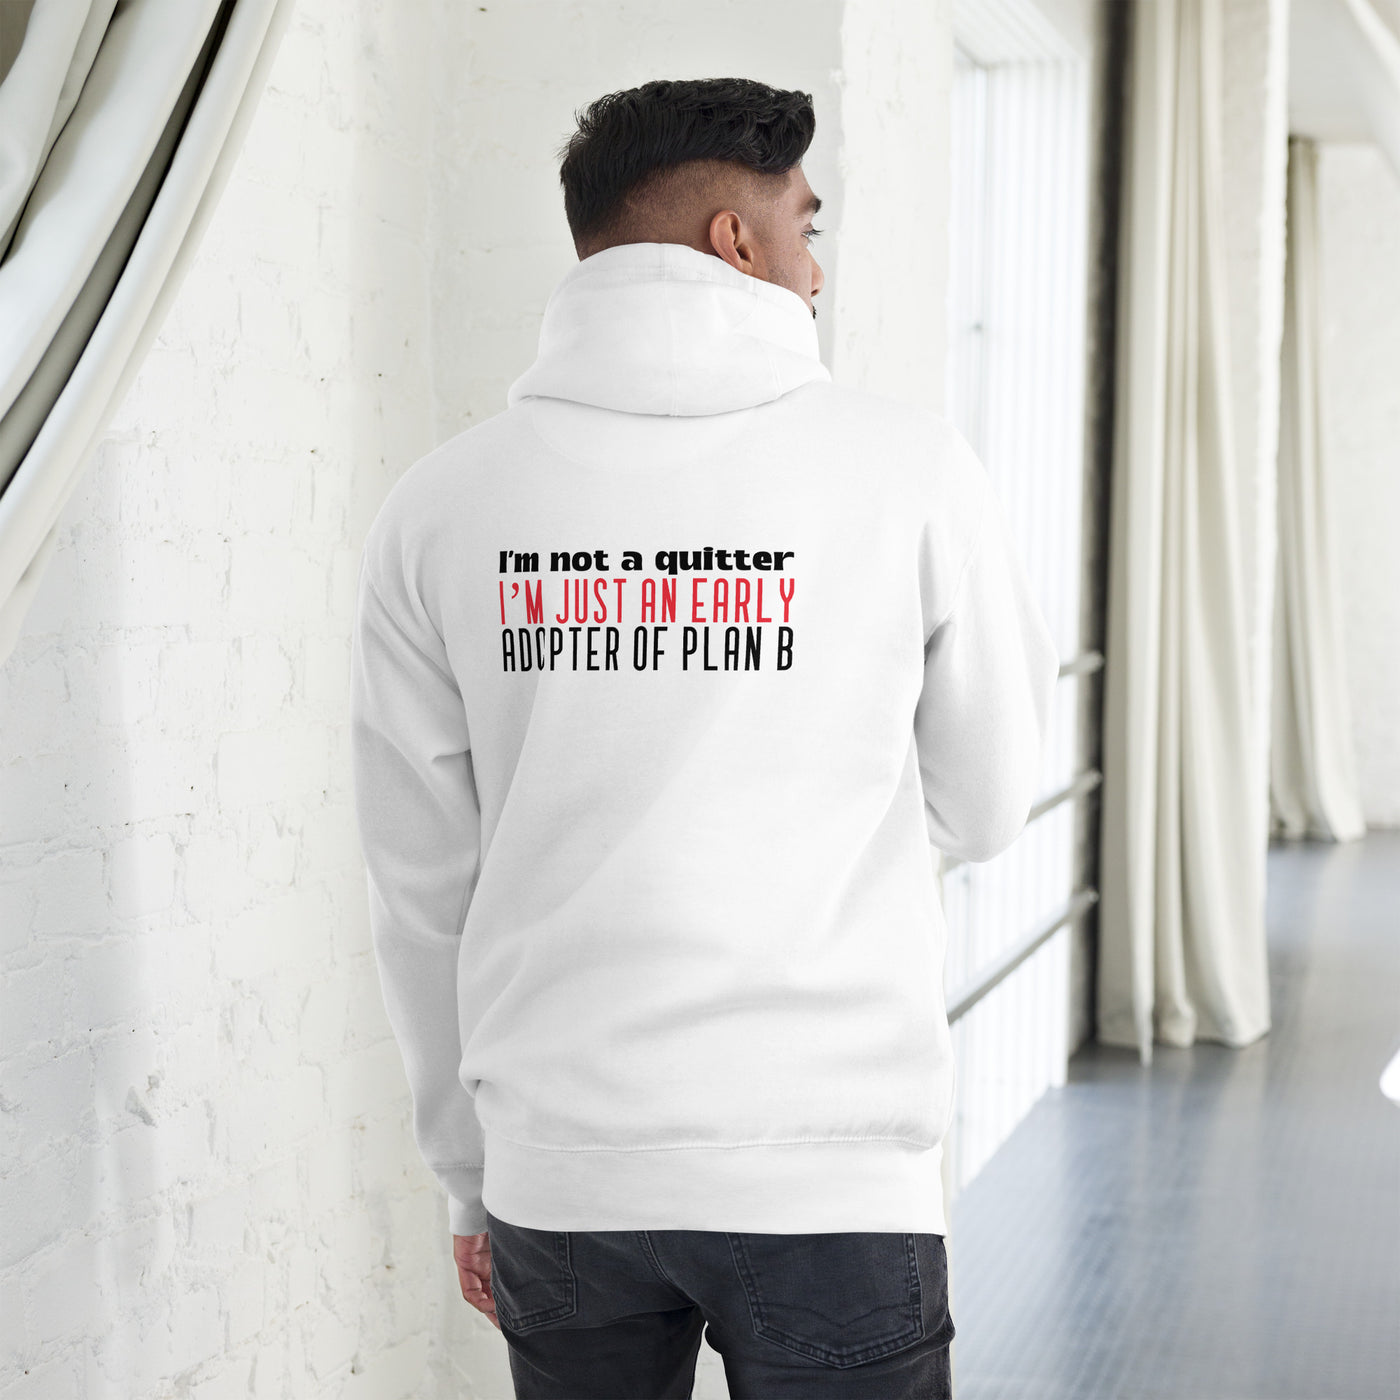 I Am not a Quitter: I Am an early adopter of Plan B - Unisex Hoodie ( Back Print )